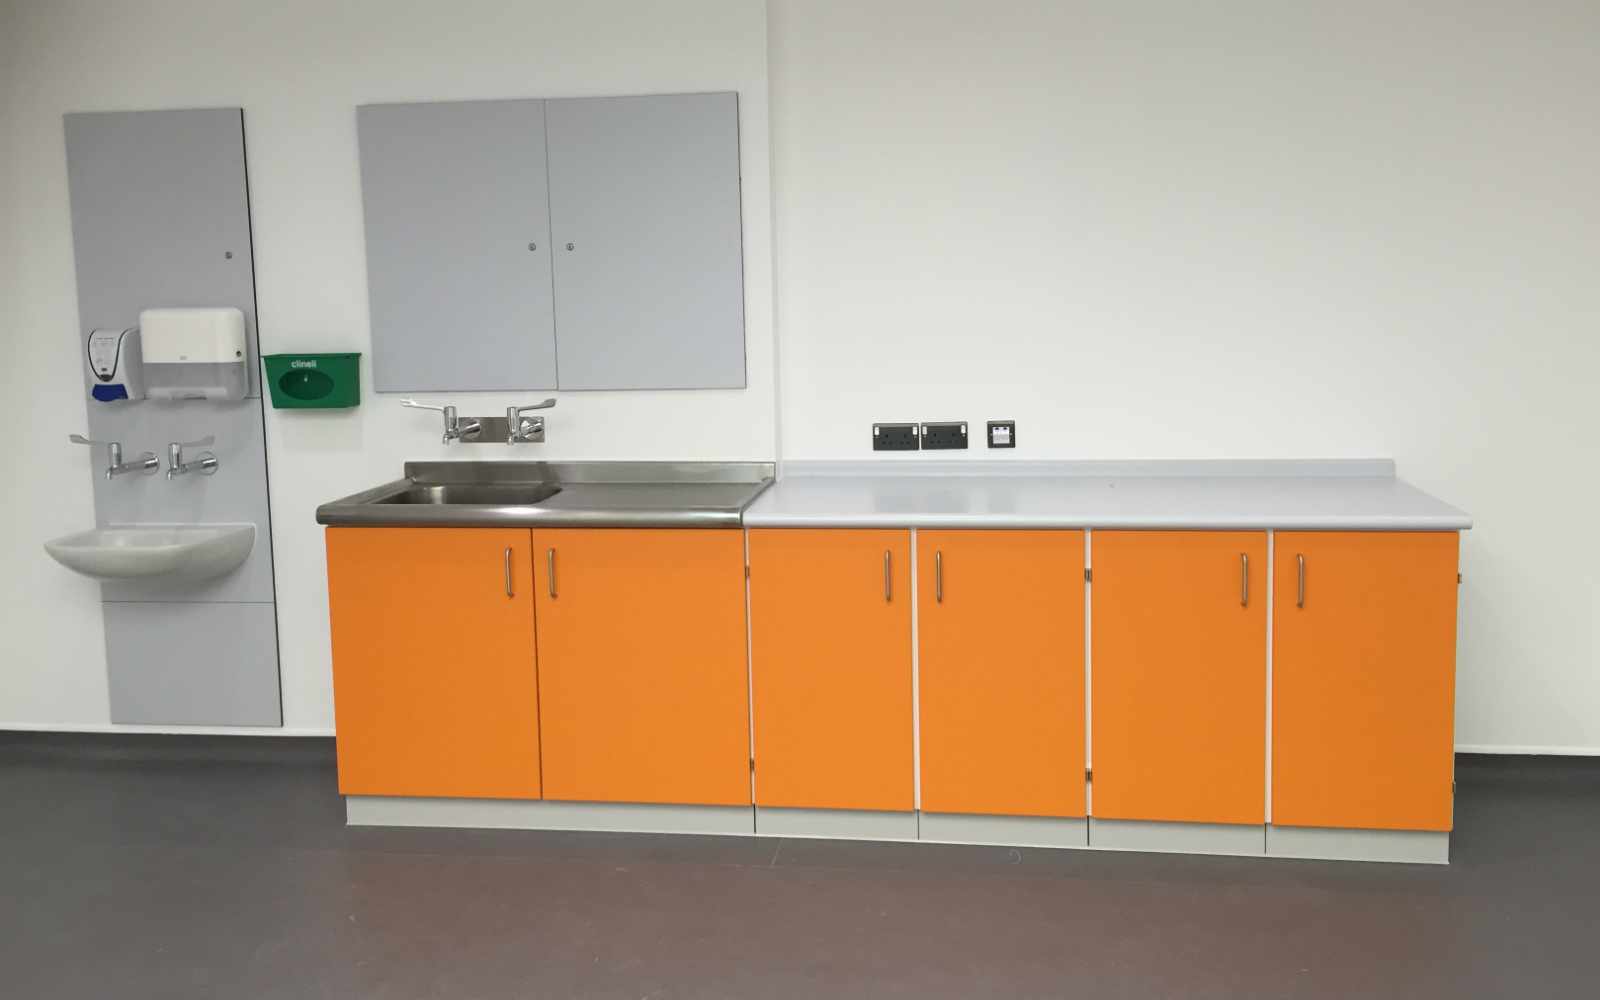 Fitted healthcare furniture for Mortimer Market sexual health clinic